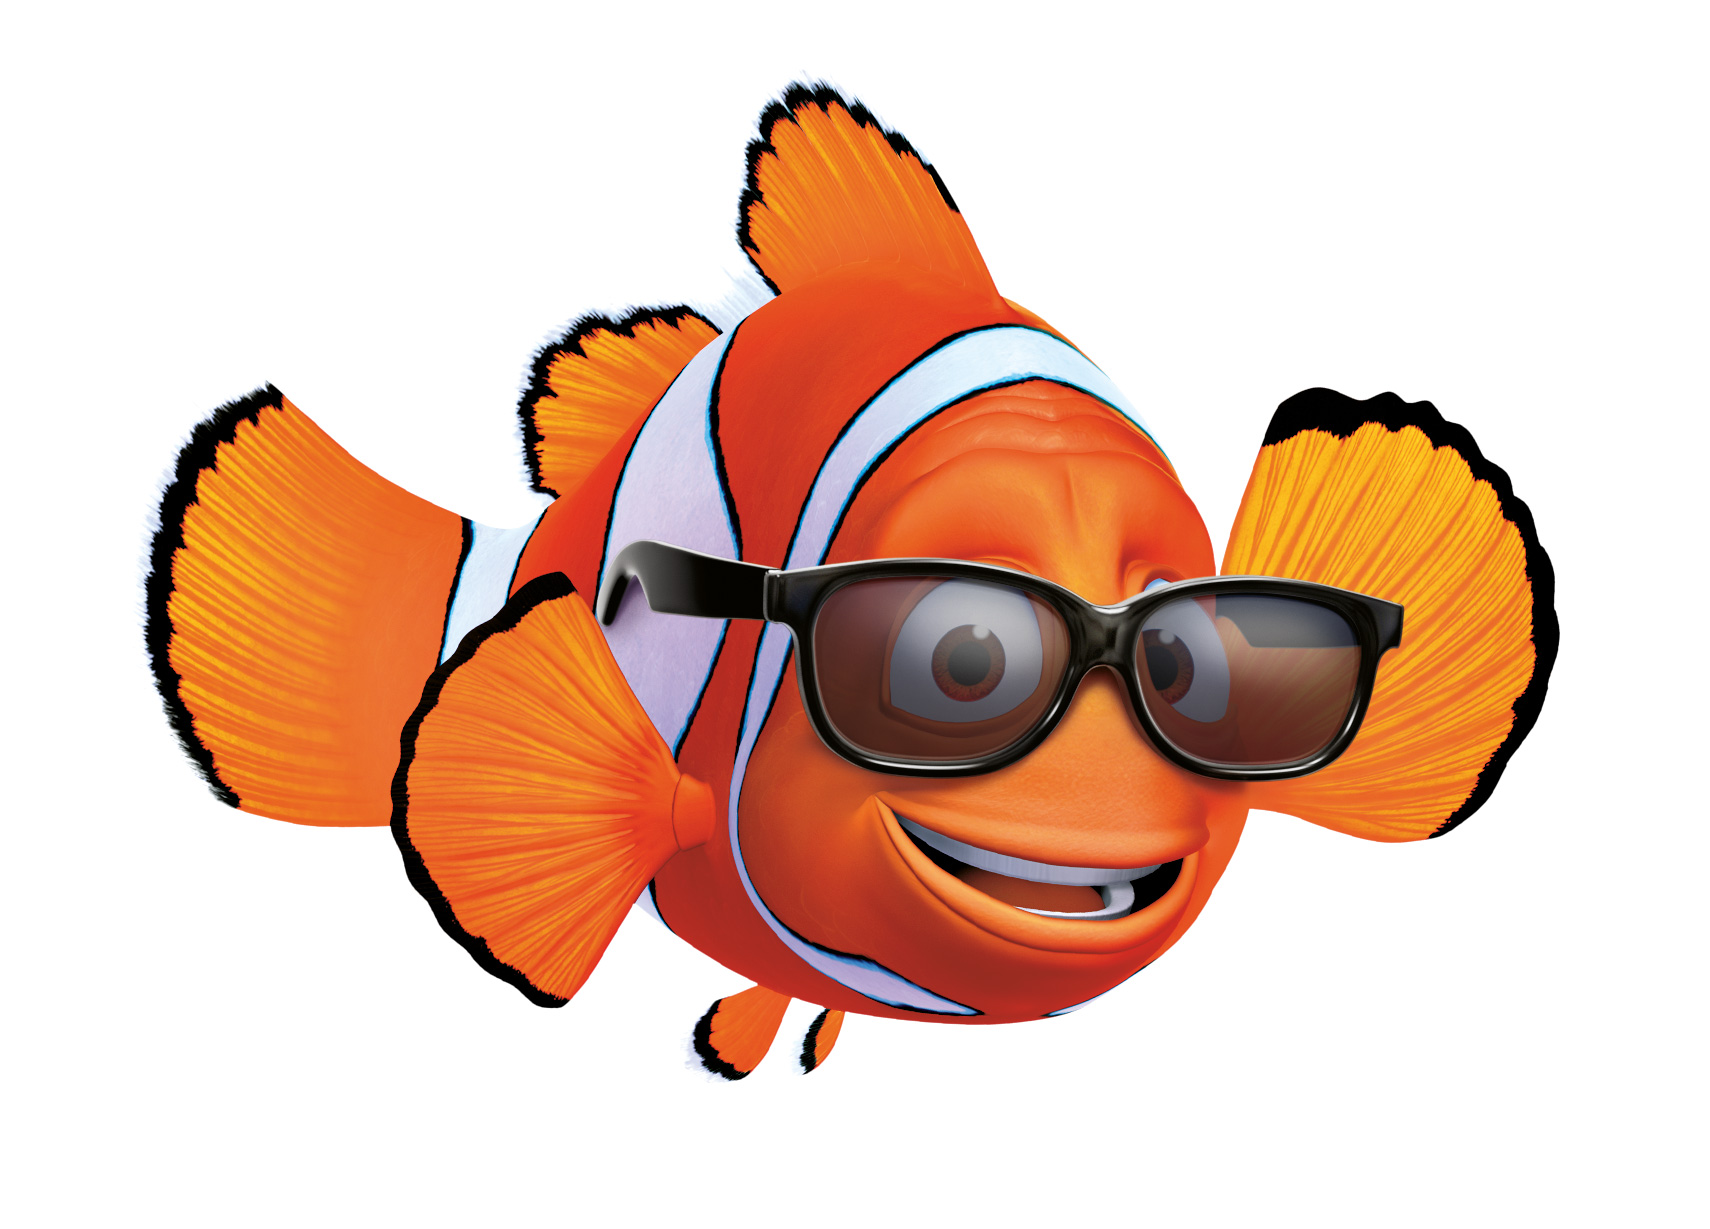 1000+ images about Finding Nemo